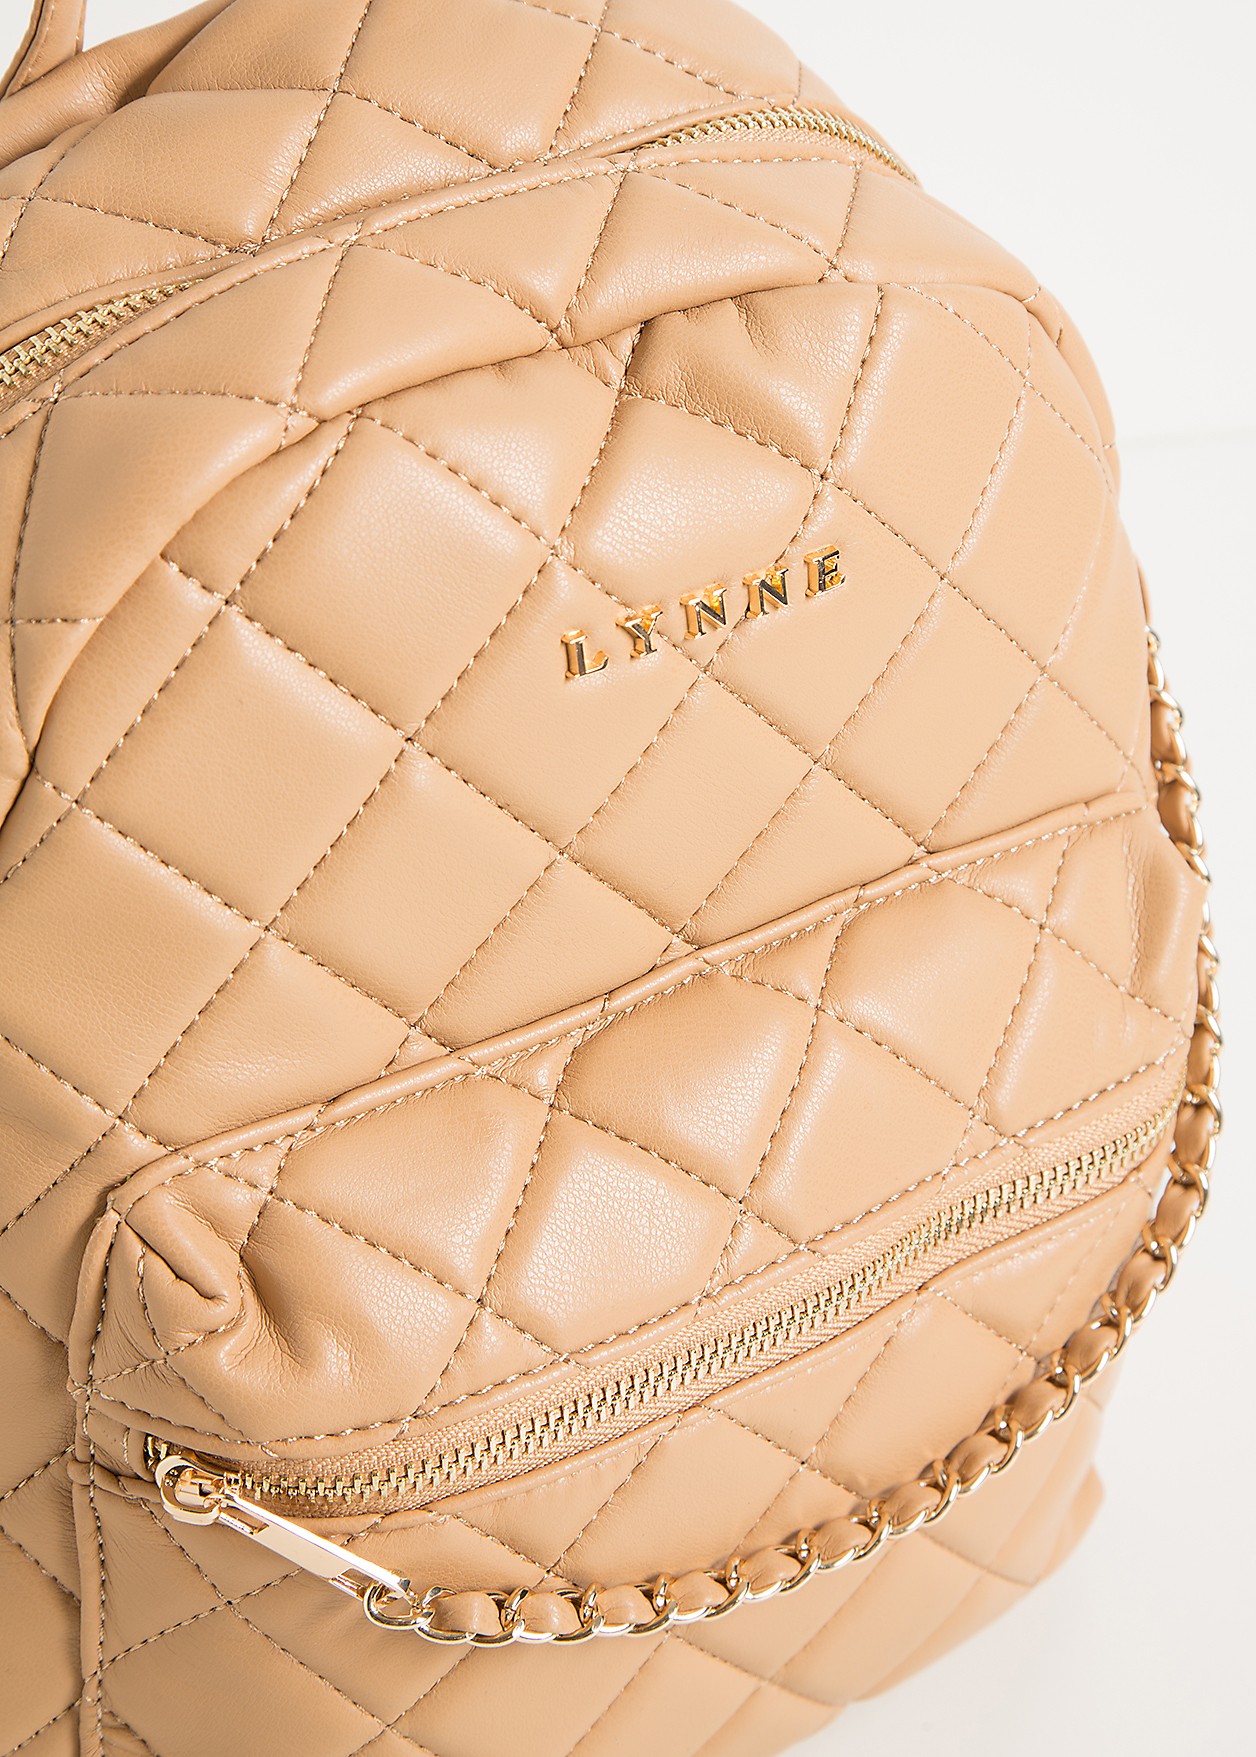 Backpack bag quilted look